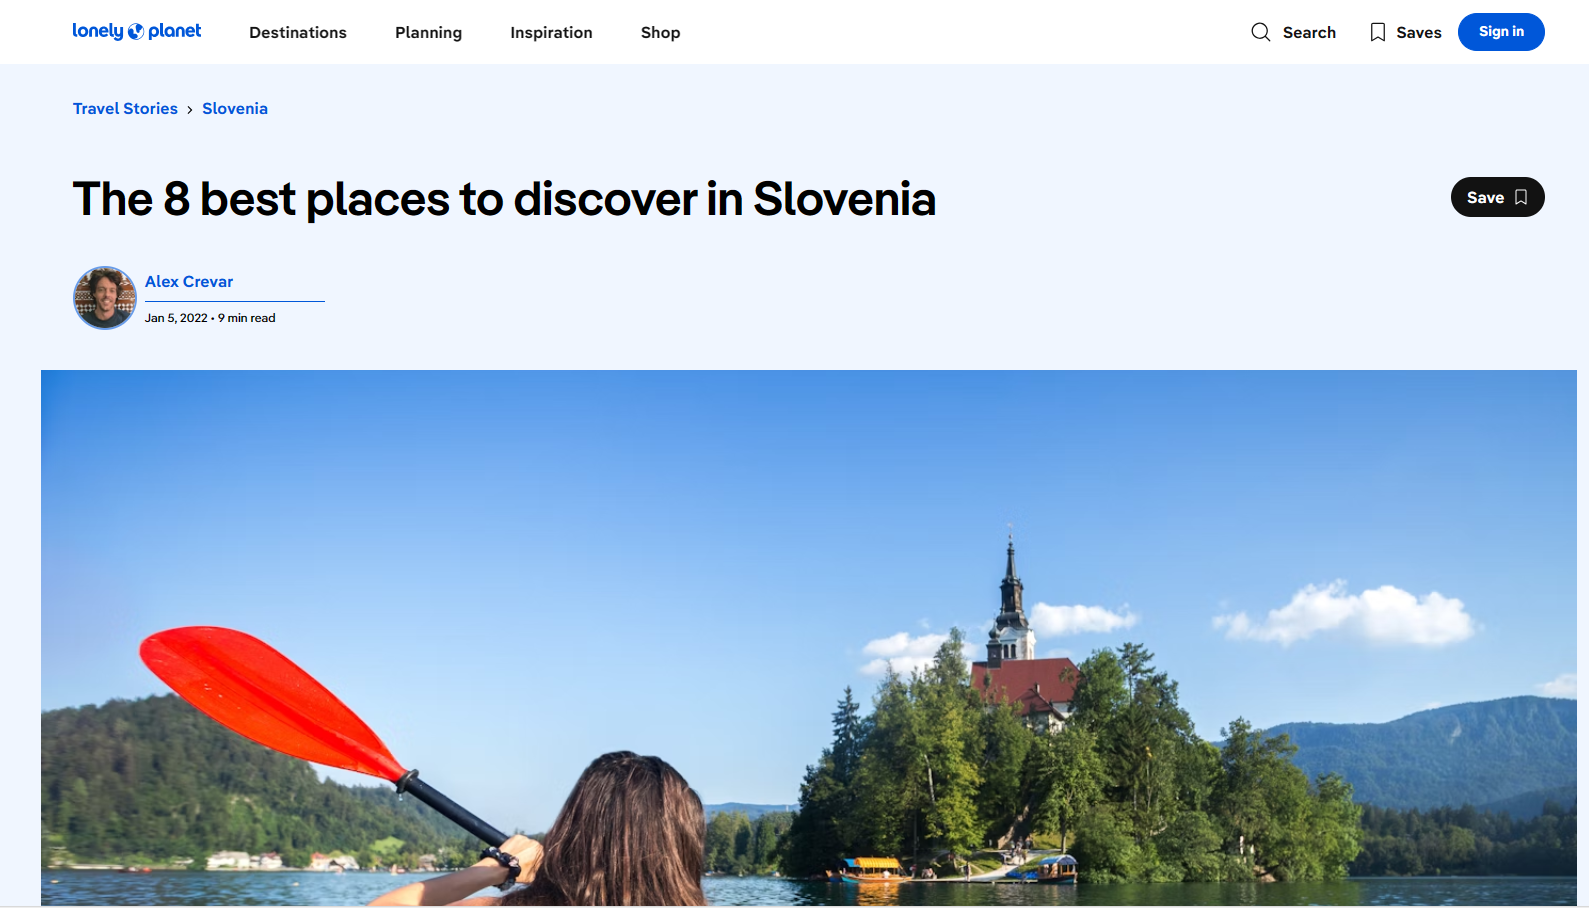 Lonely_Planet_8_best_places_to_discover_in_Slovenia.png